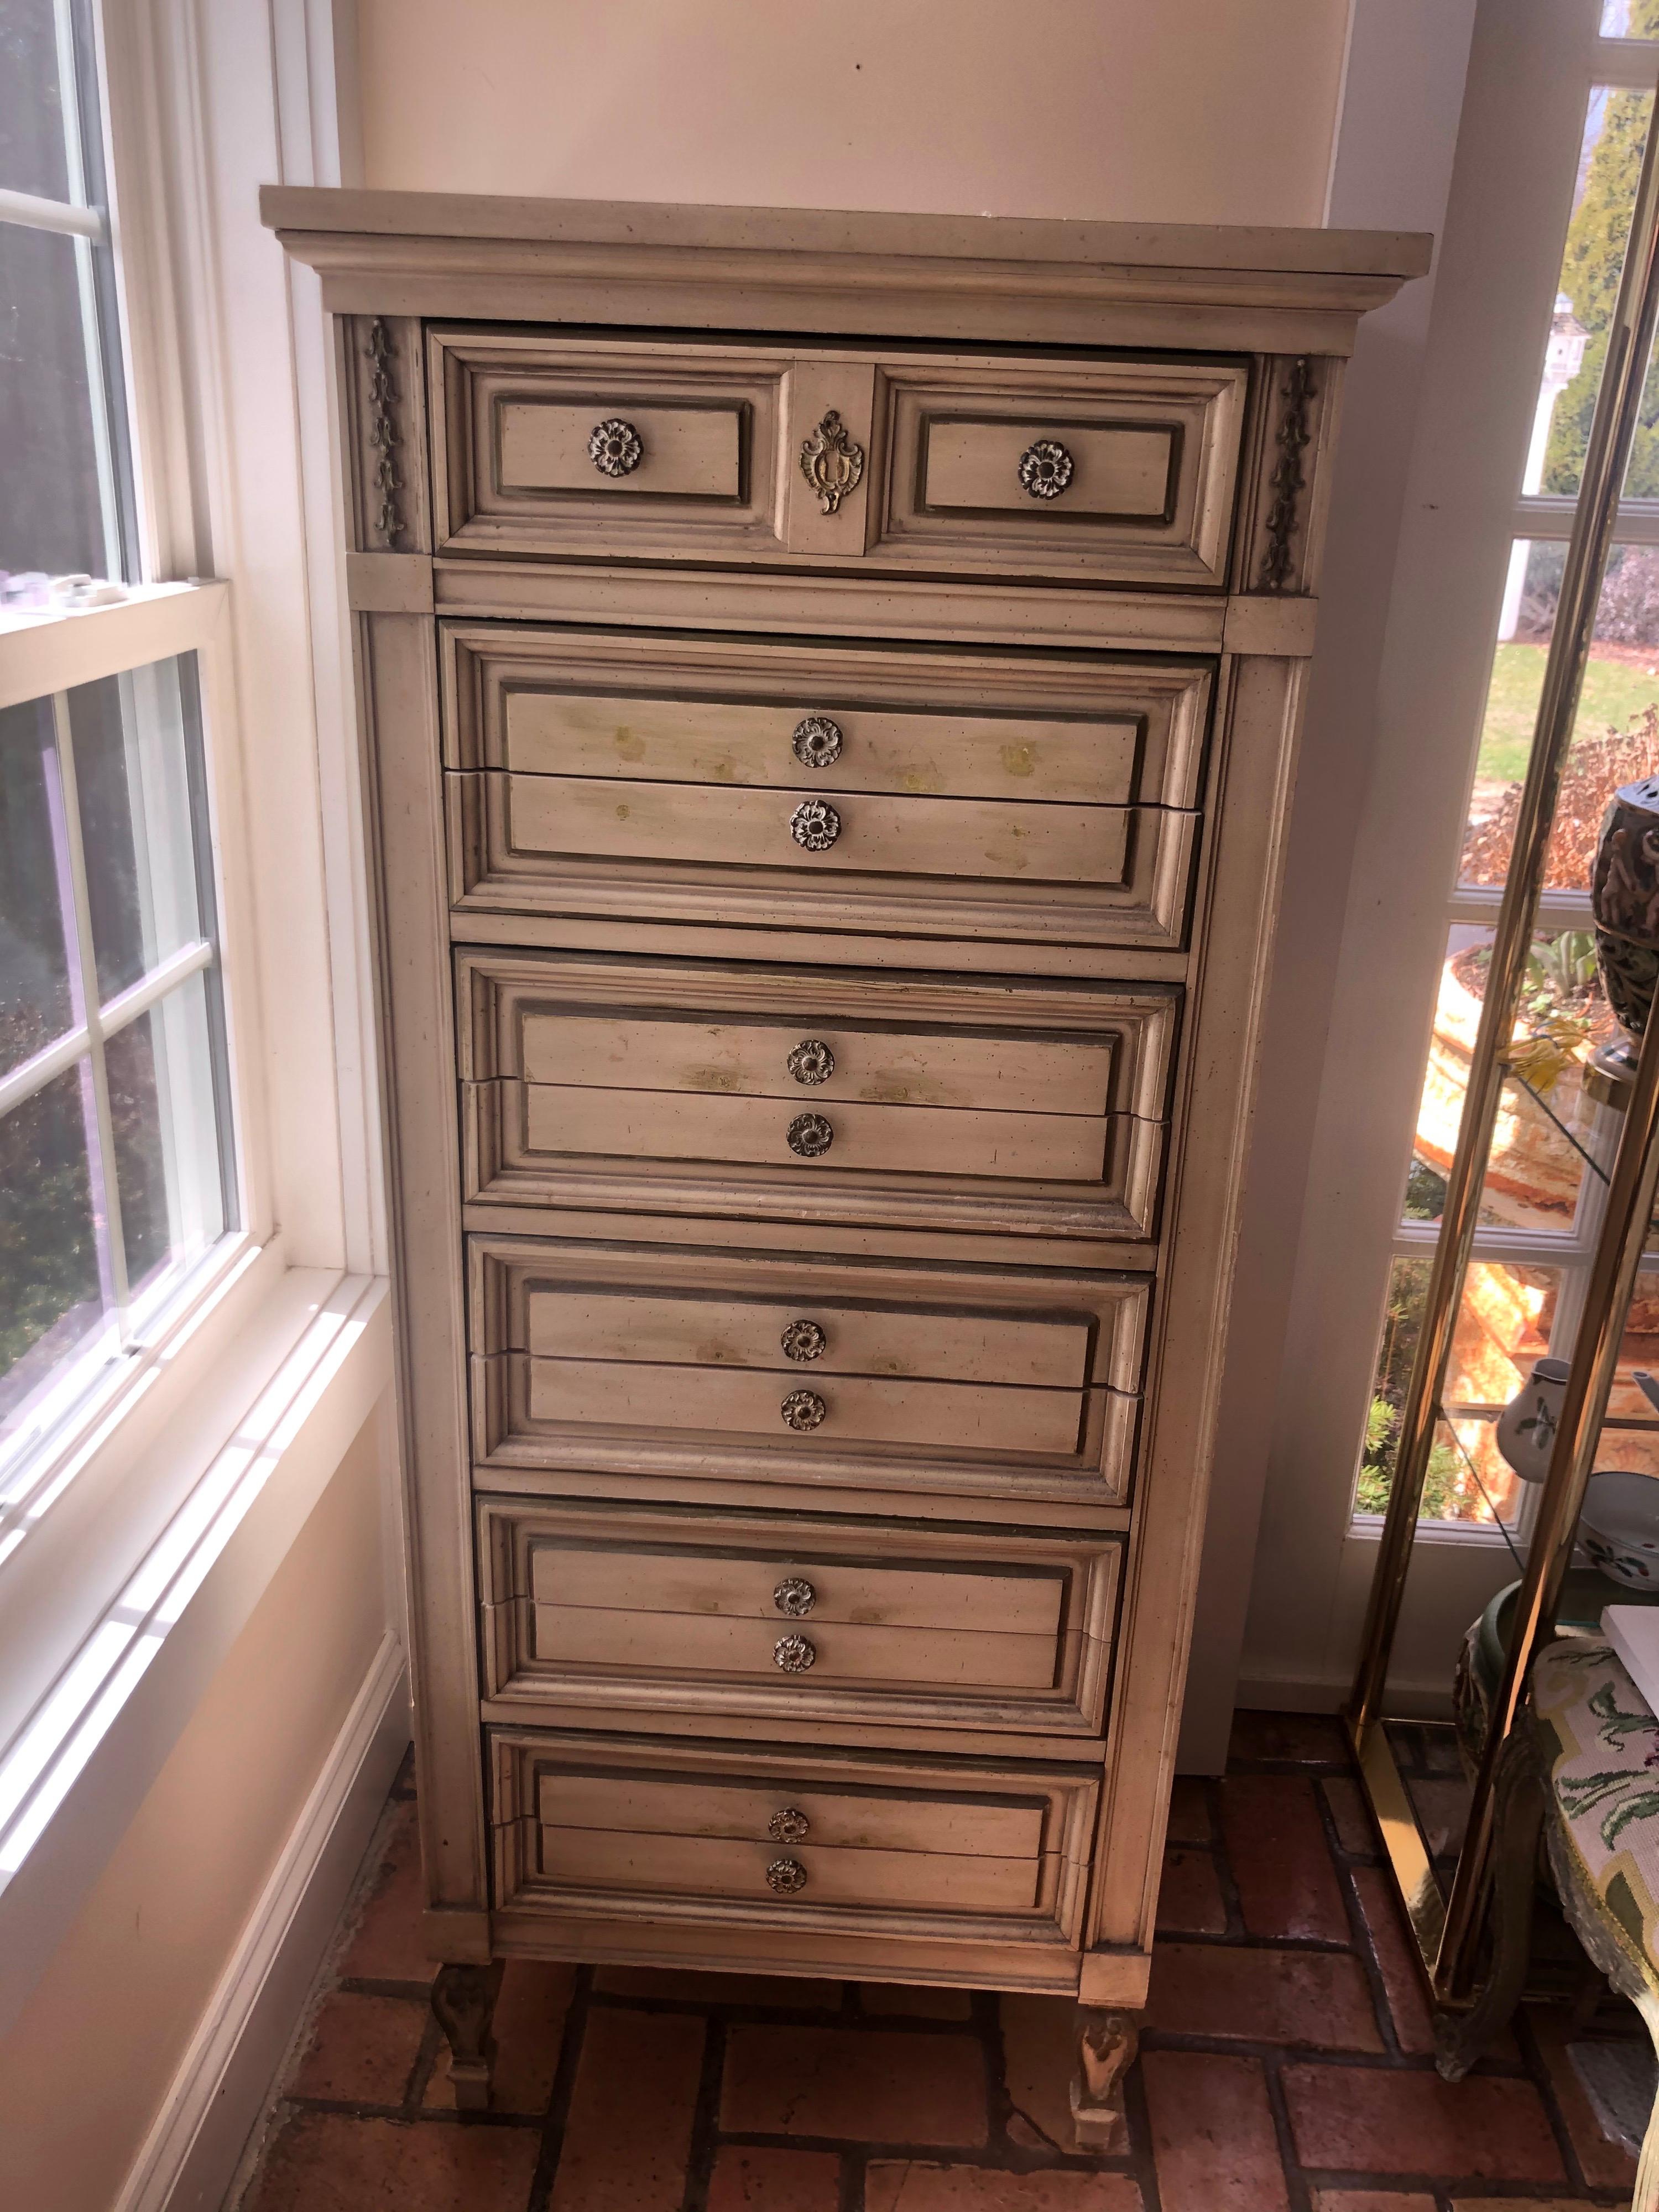 Hollywood Regency upright jewelry dresser. This vintage piece made by Dixie has been custom fitted for jewelry. The original knobs have been moved to make better use of this dresser/semanier for holding jewelry. Thin sliced 11 drawers allow for